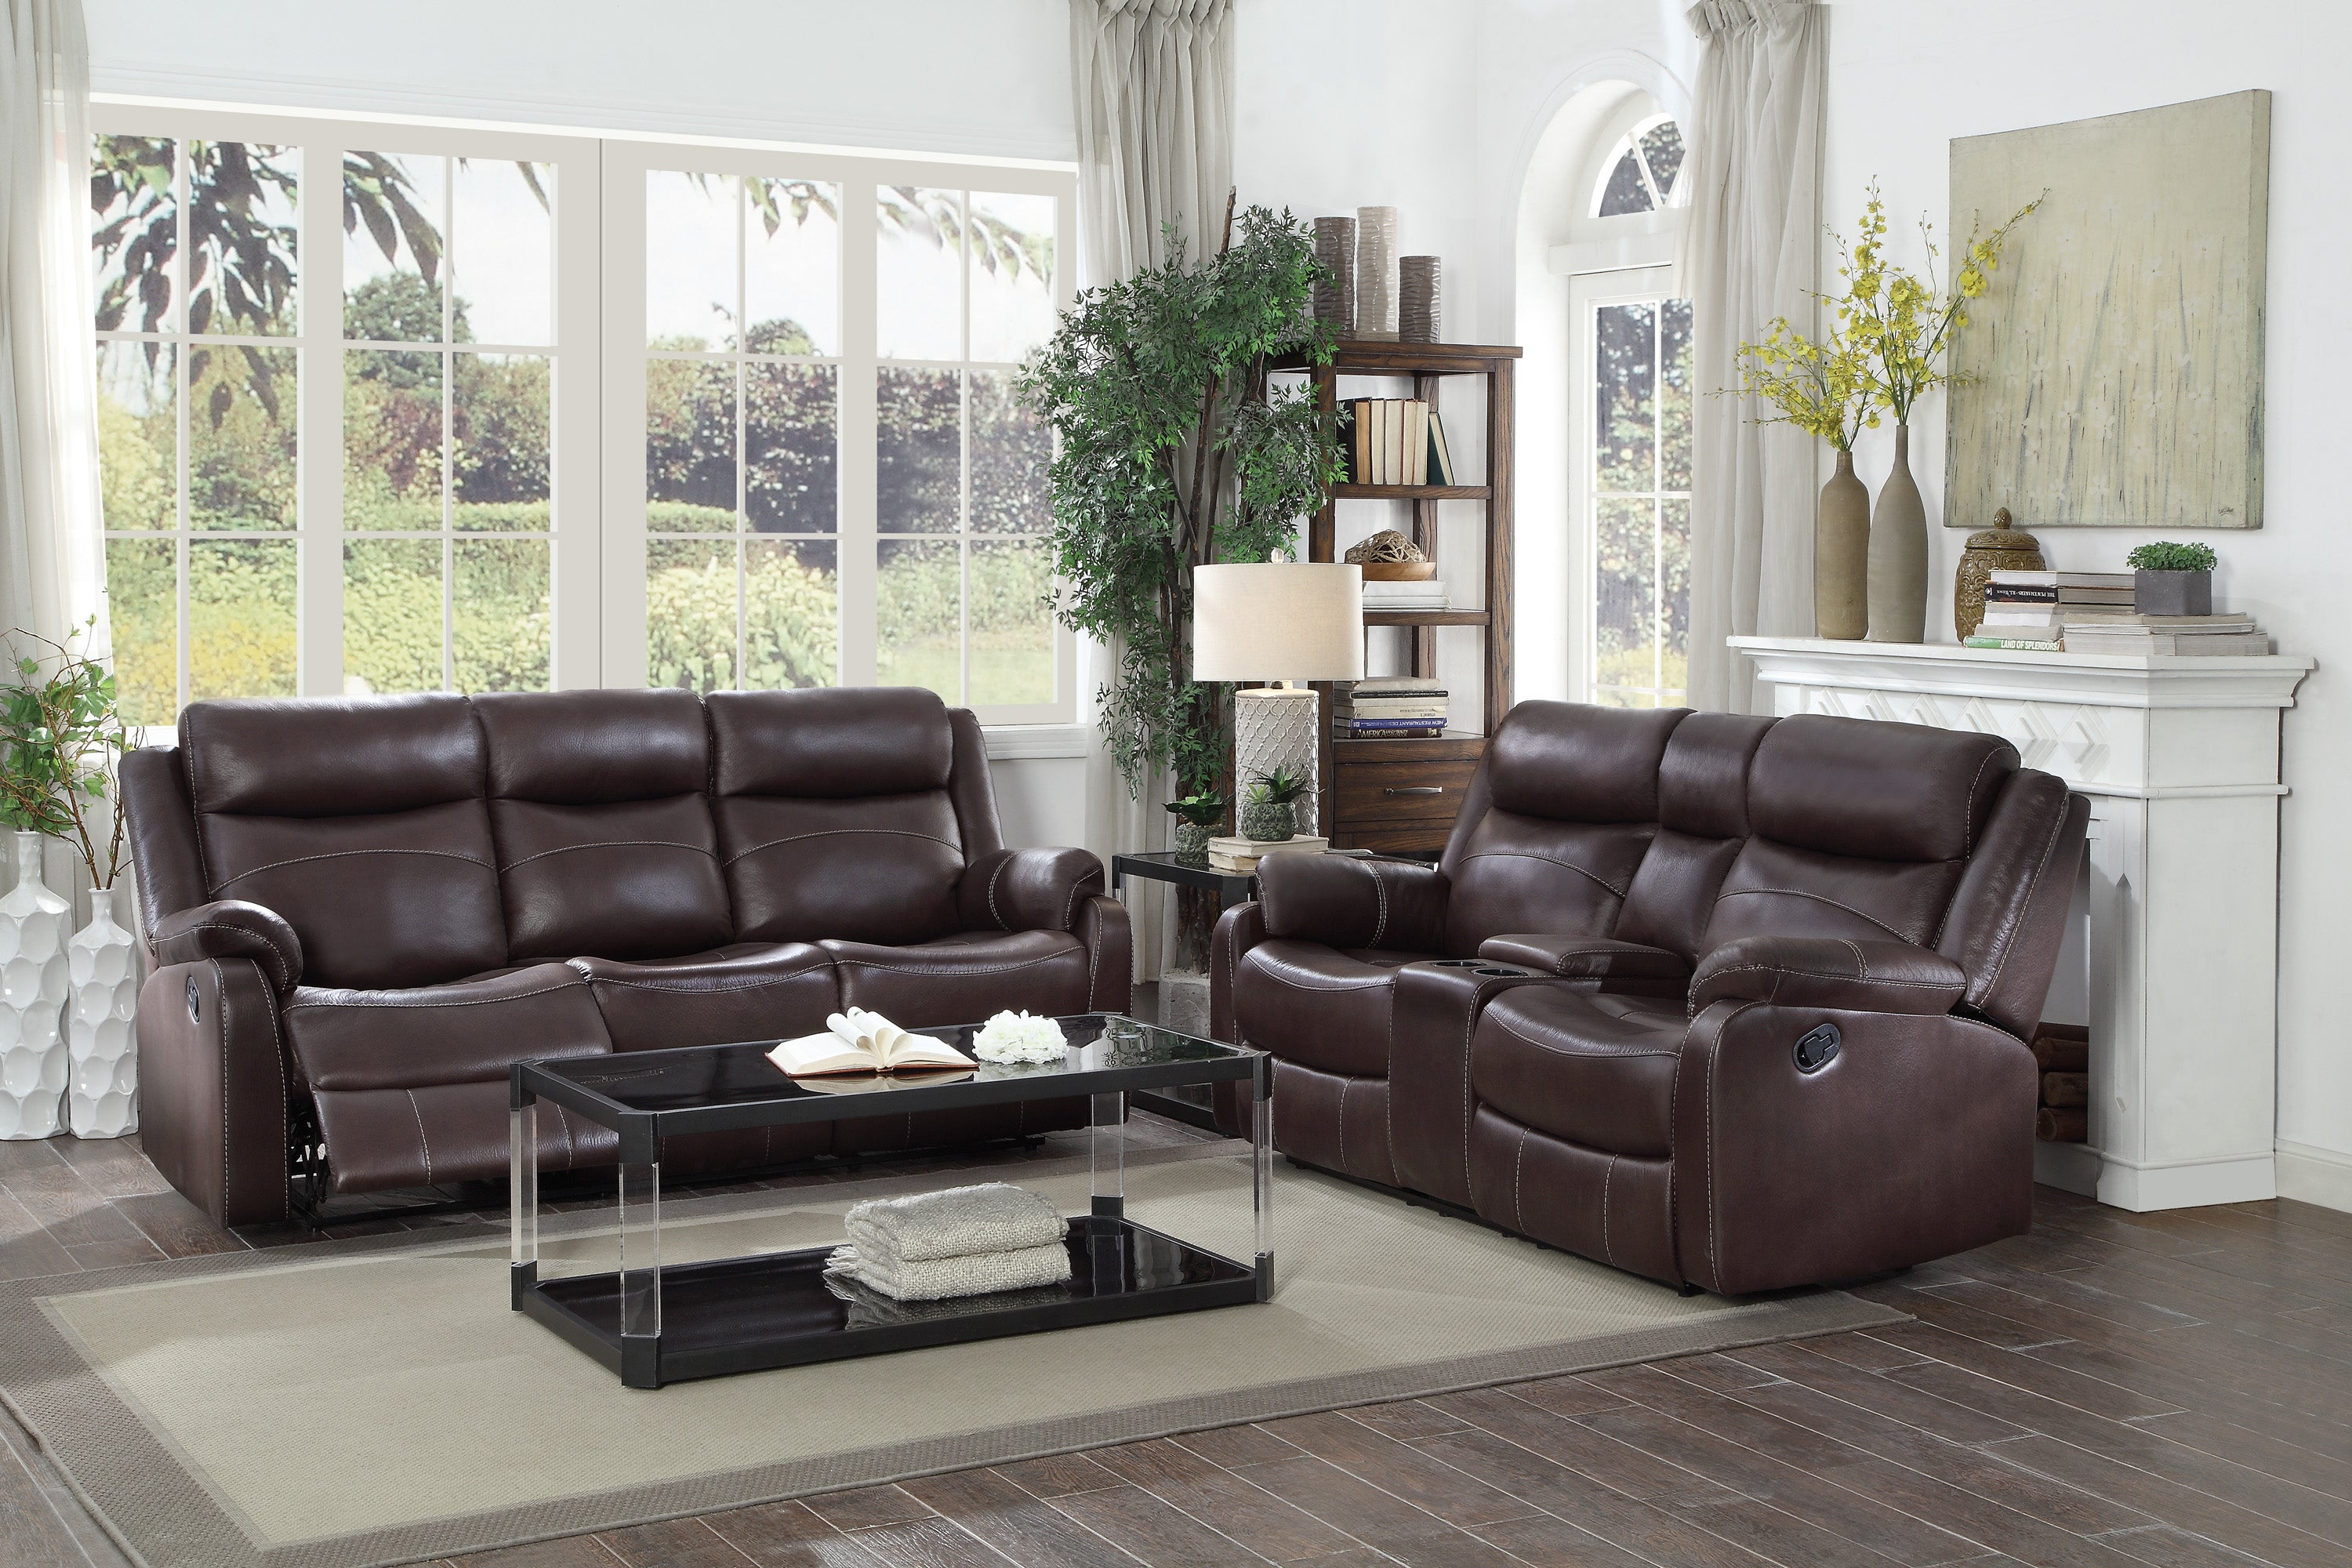 Yerba Brown Microfiber Double Lay Reclining Living Room Set 9990HomeleganceLiving Room SetDesigned To Make Your Downtime As Relaxing As Possible